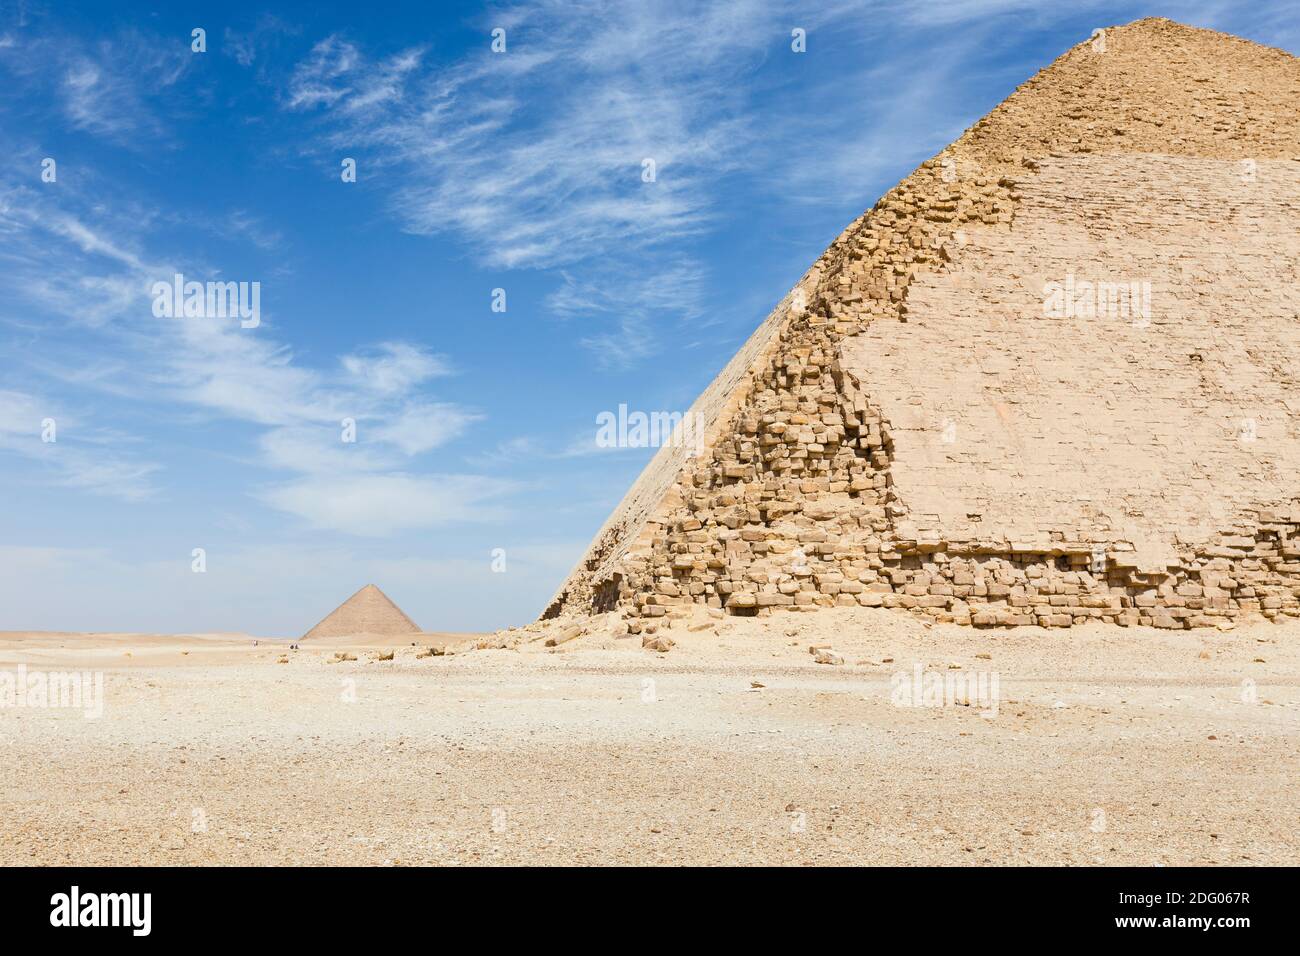 The bent pyramid with the red pyramid in the distance, Dahshur, Egypt Stock Photo